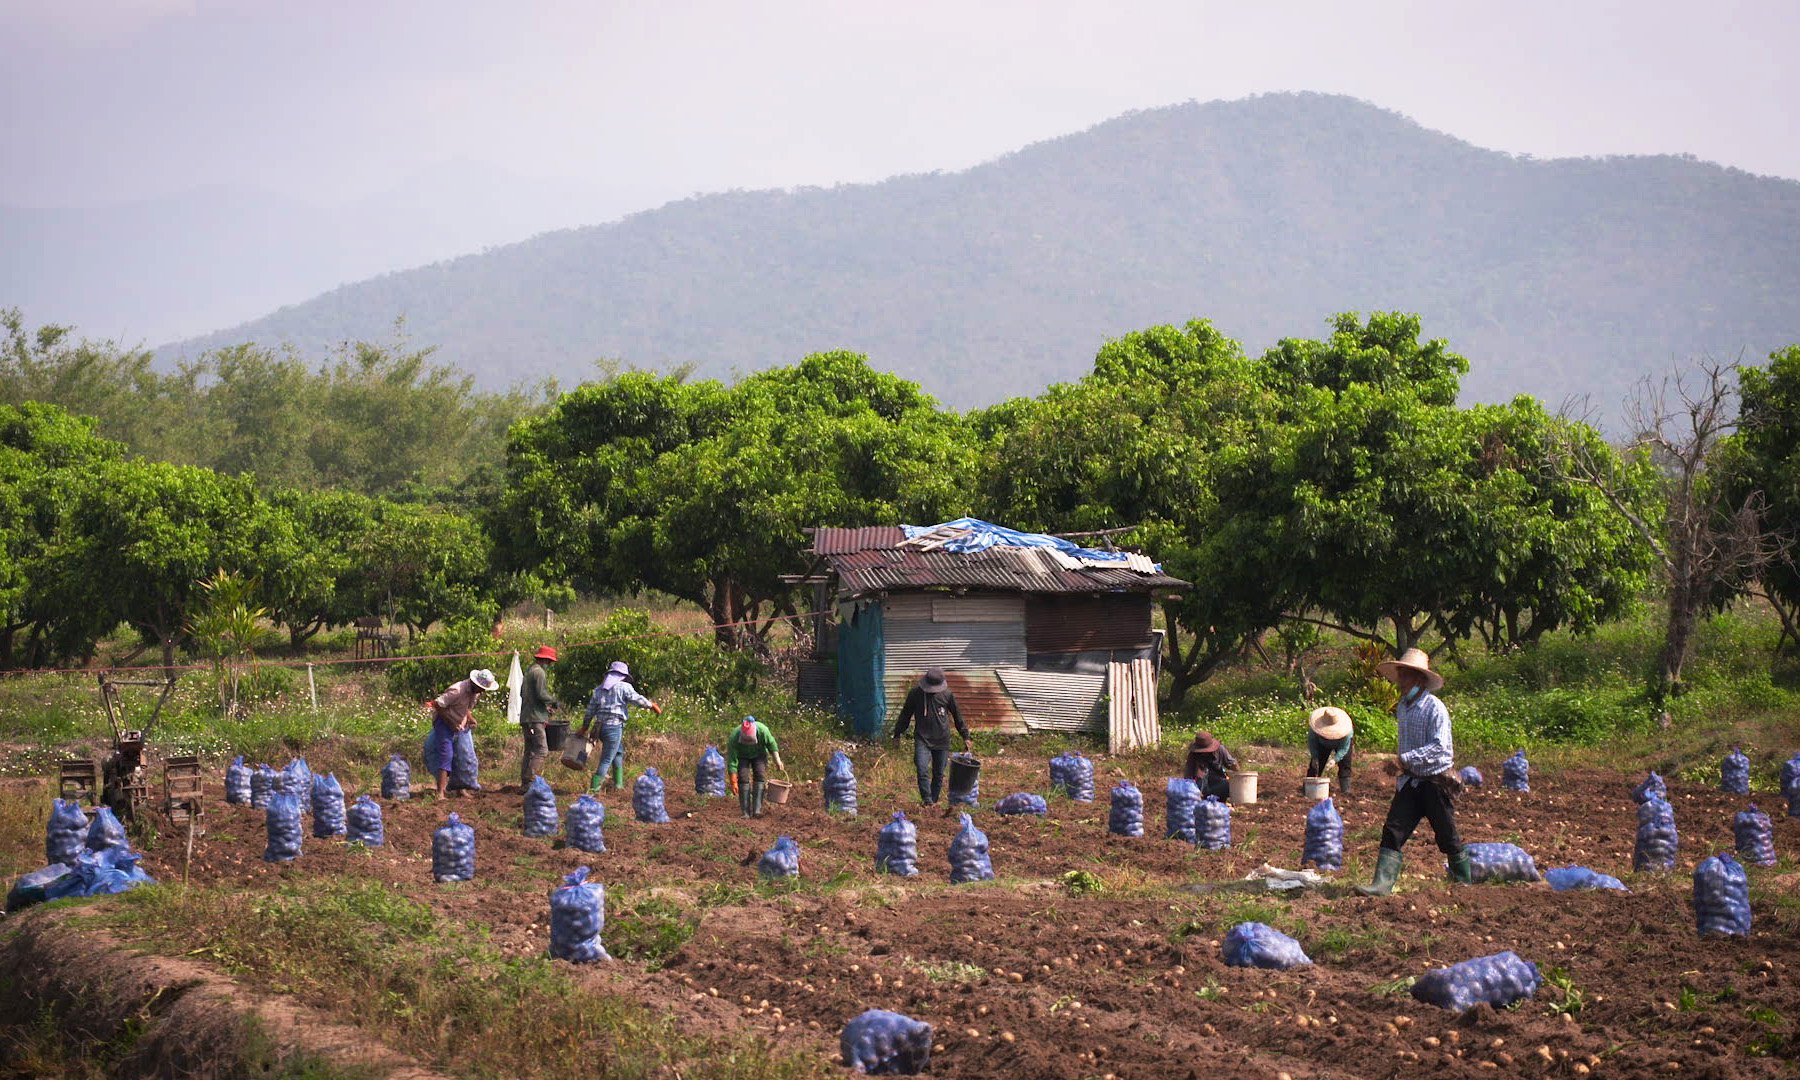 Group of farmers in a field collect potatoes in bags